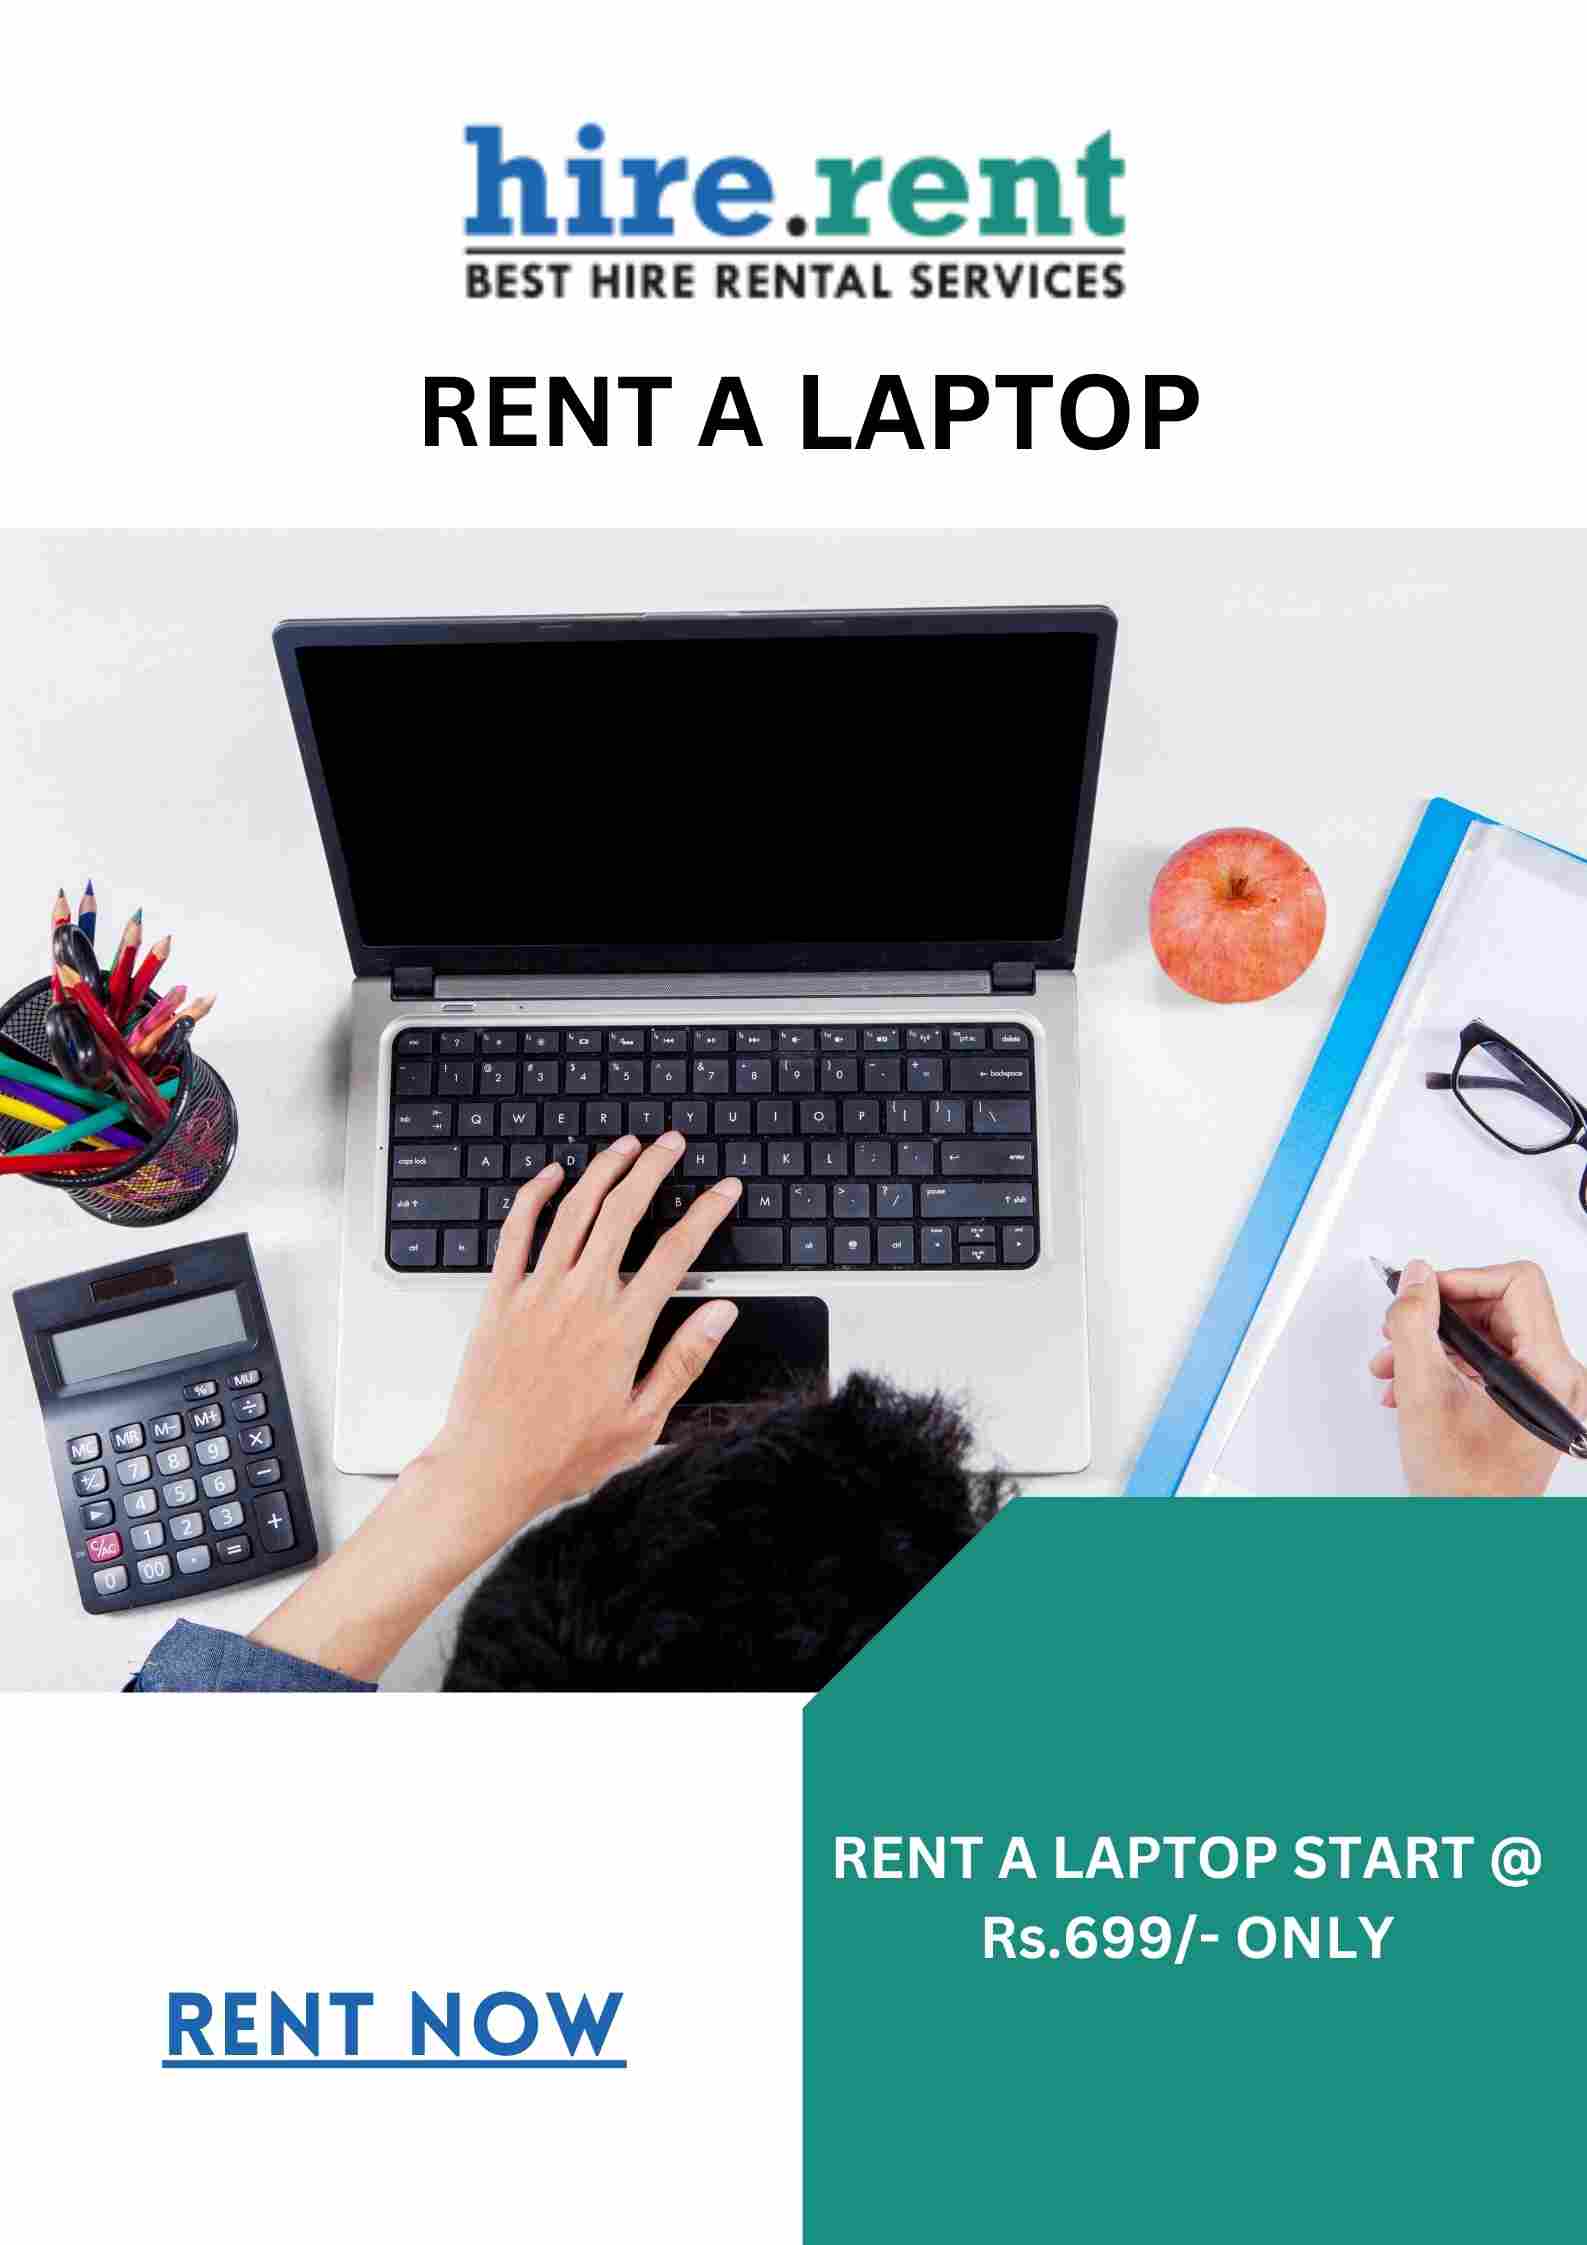 Laptop on rent price start at Rs.699 Mumbai 9892080937Buy and SellComputersAll Indiaother